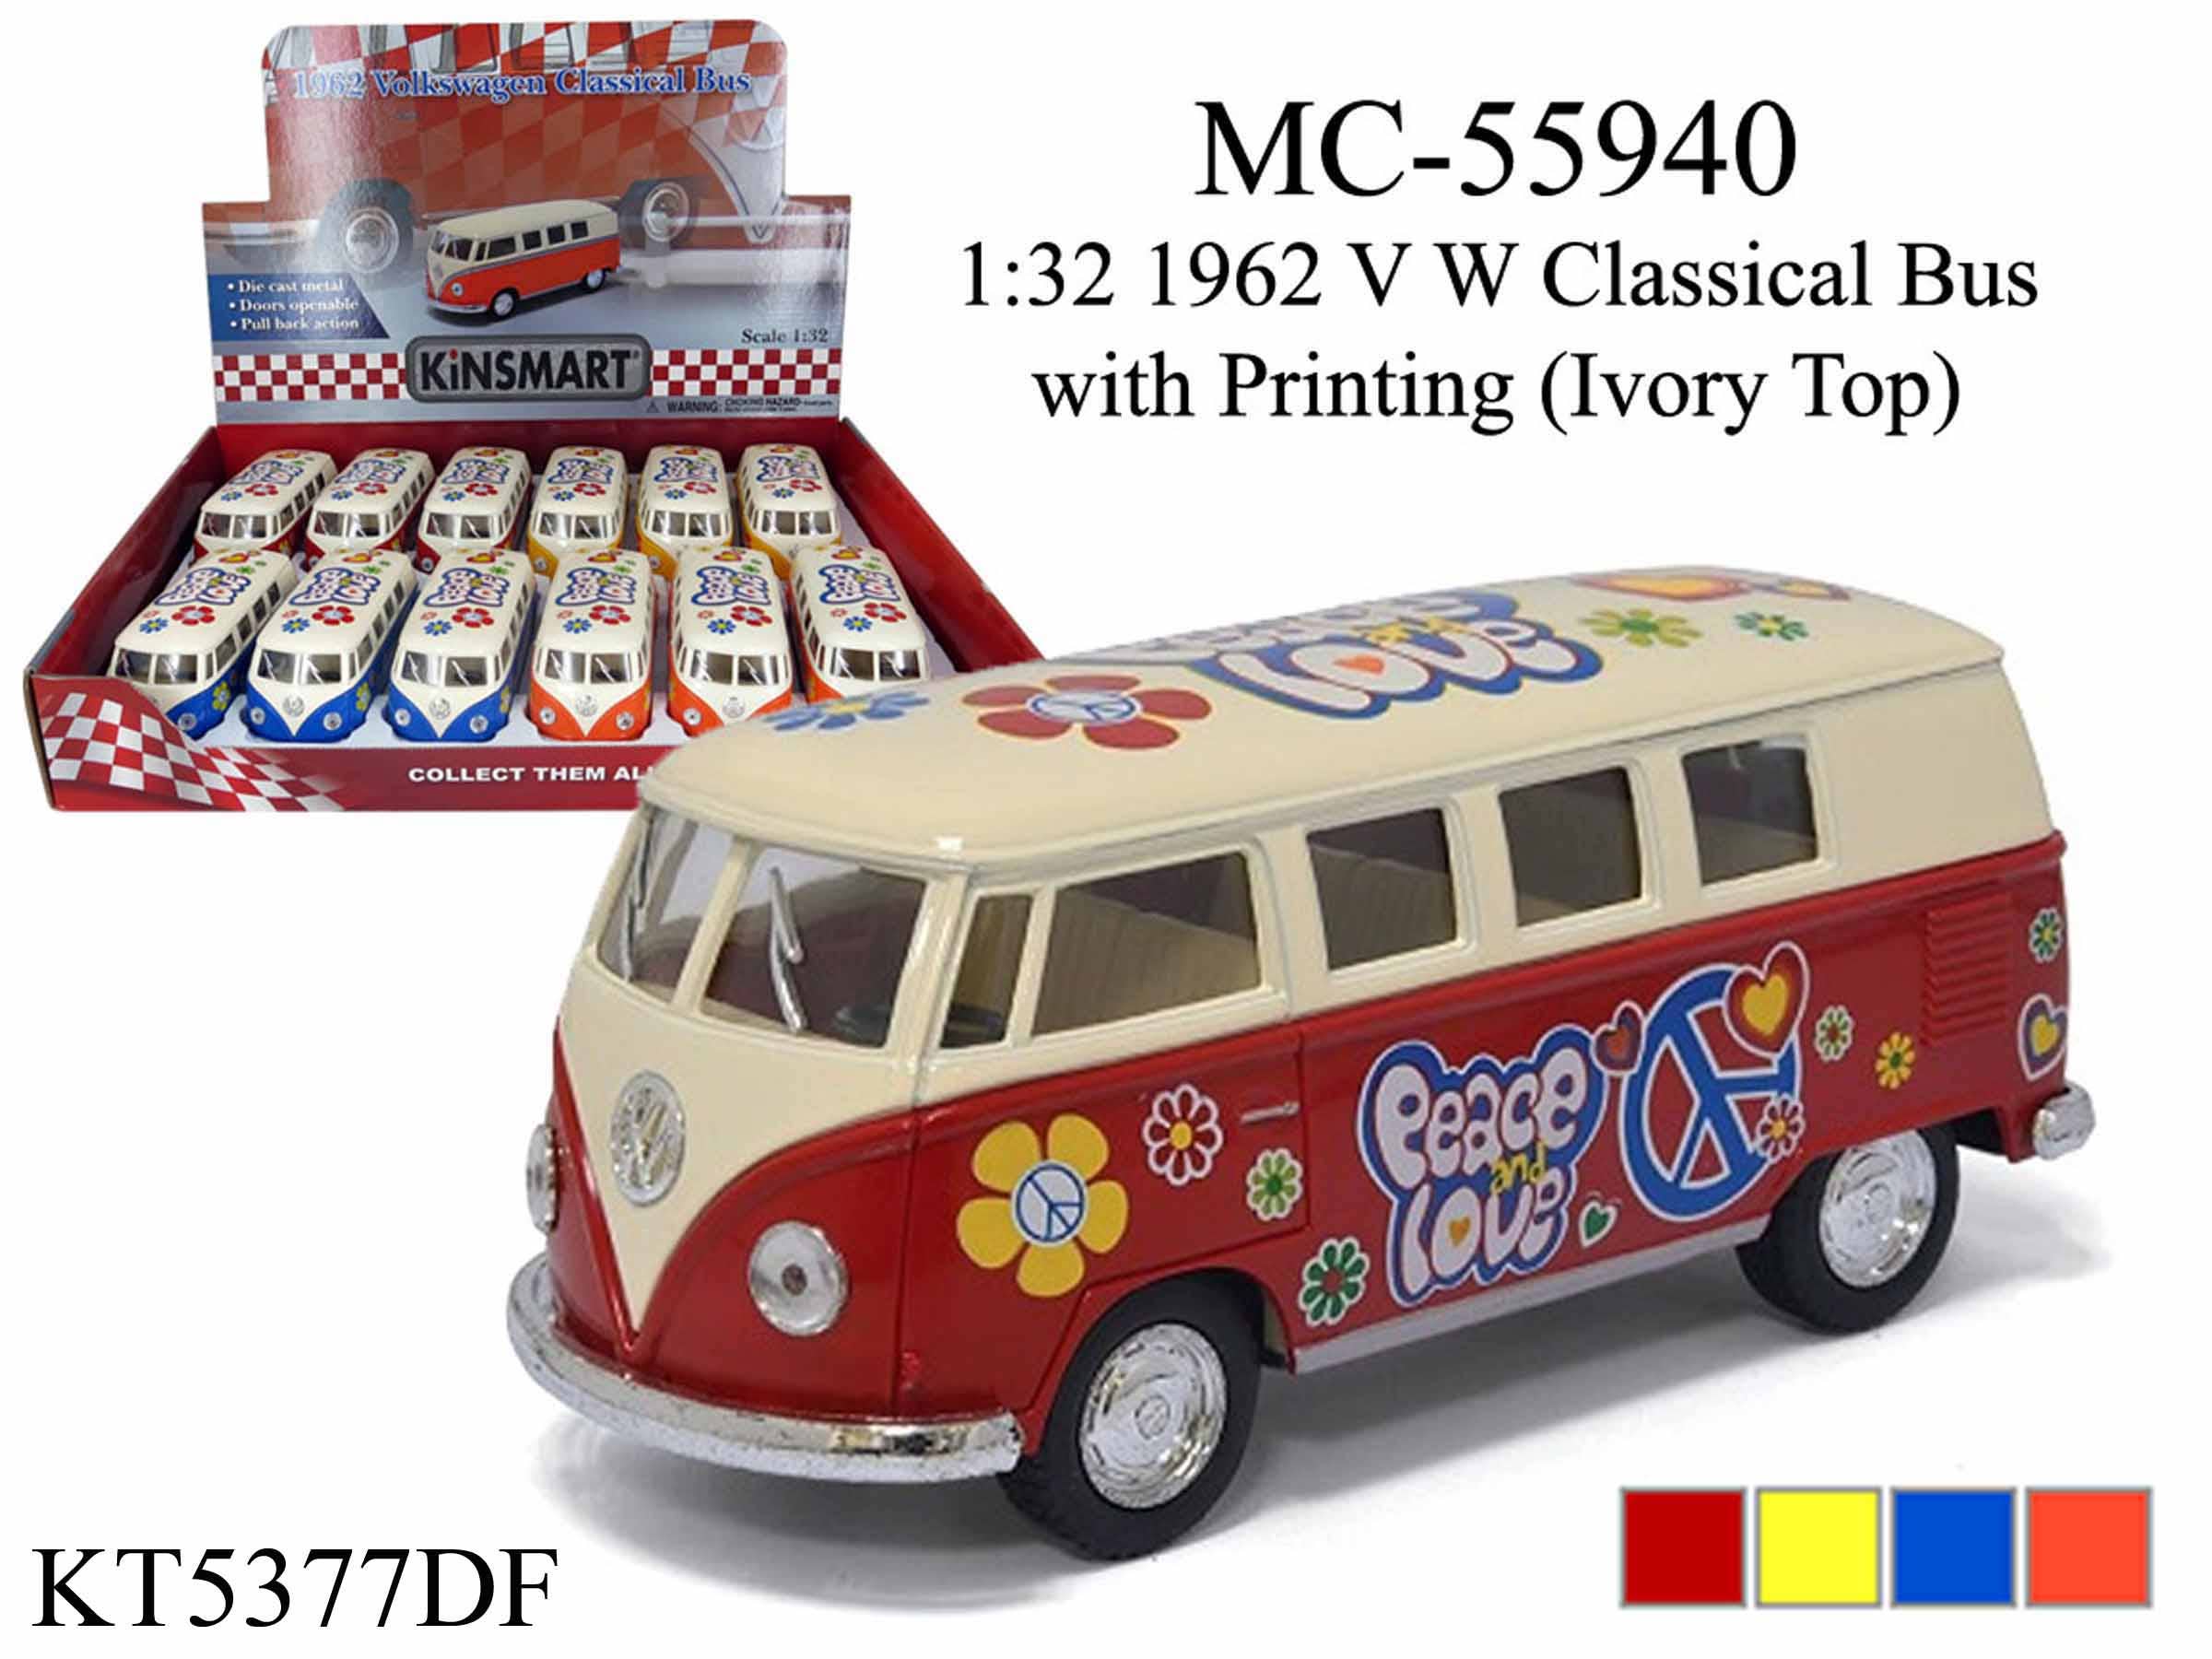 1962 Volkswagen Classical Bus Diecast Model with Ivory Top and Colorful Prints